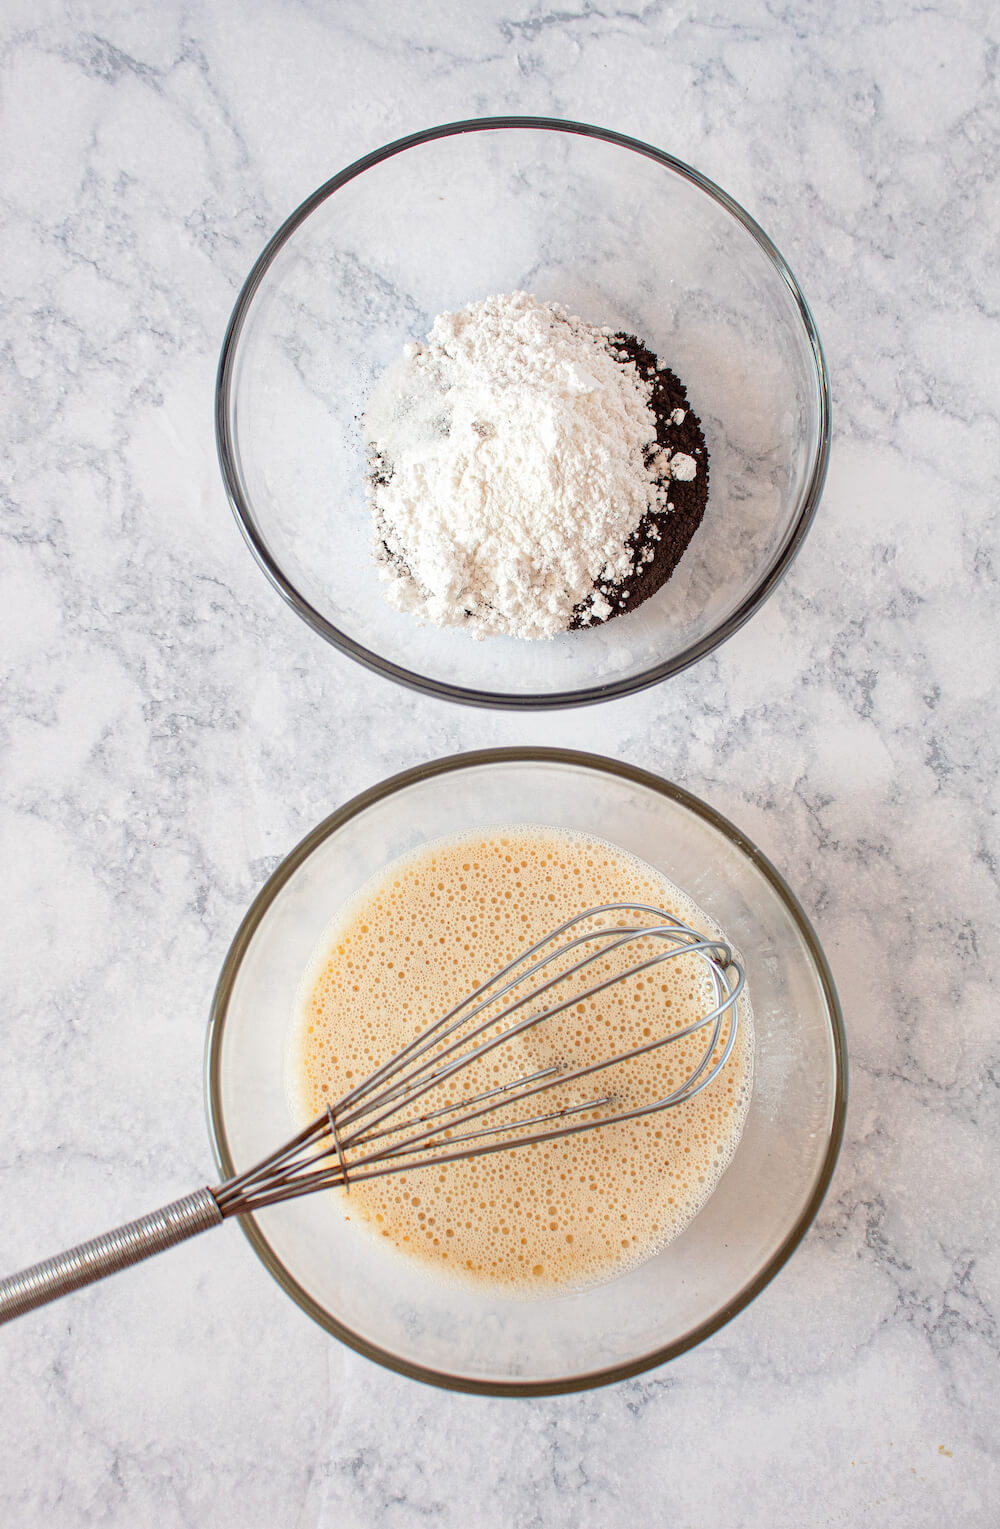 Mix the wet and dry ingredients separately for this recipe.